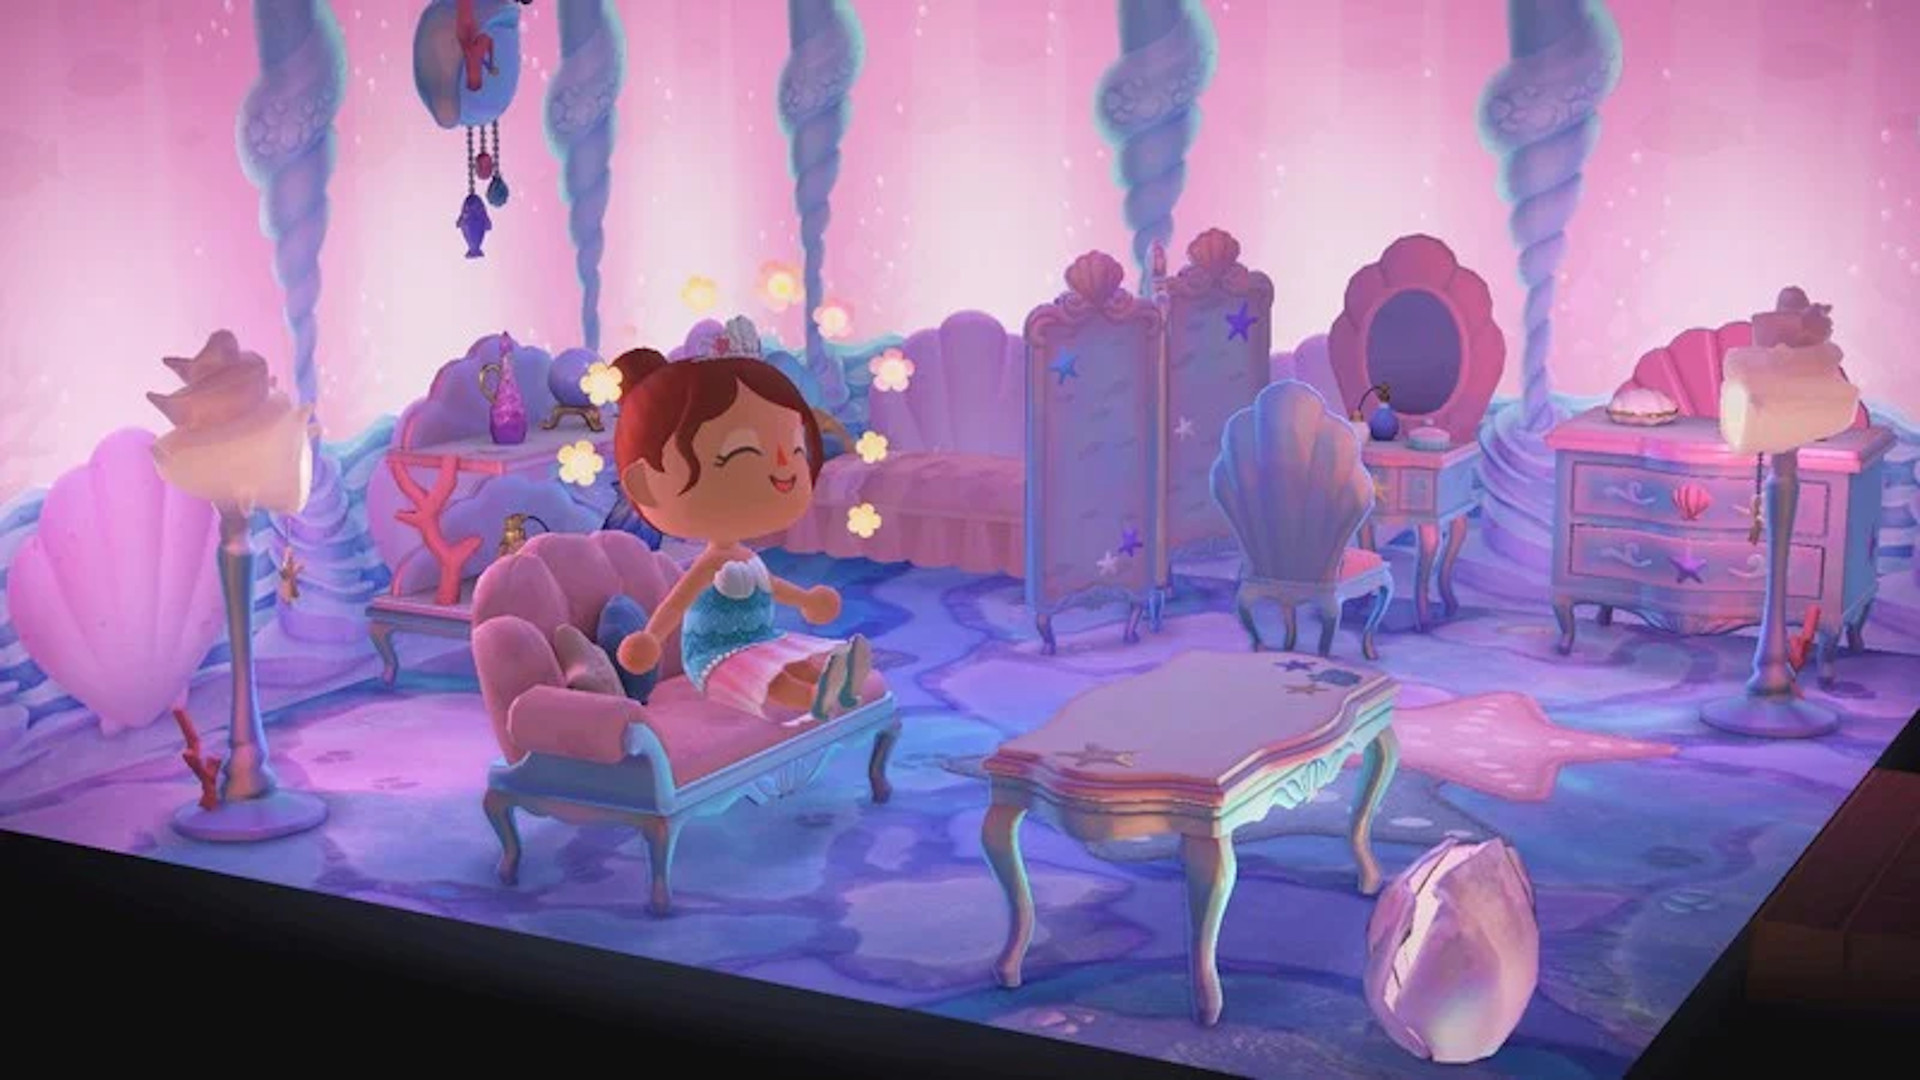 Animal Crossing New Horizons island ideas: An Animal Crossing character dressed as a mermaid in a sea-themed room.